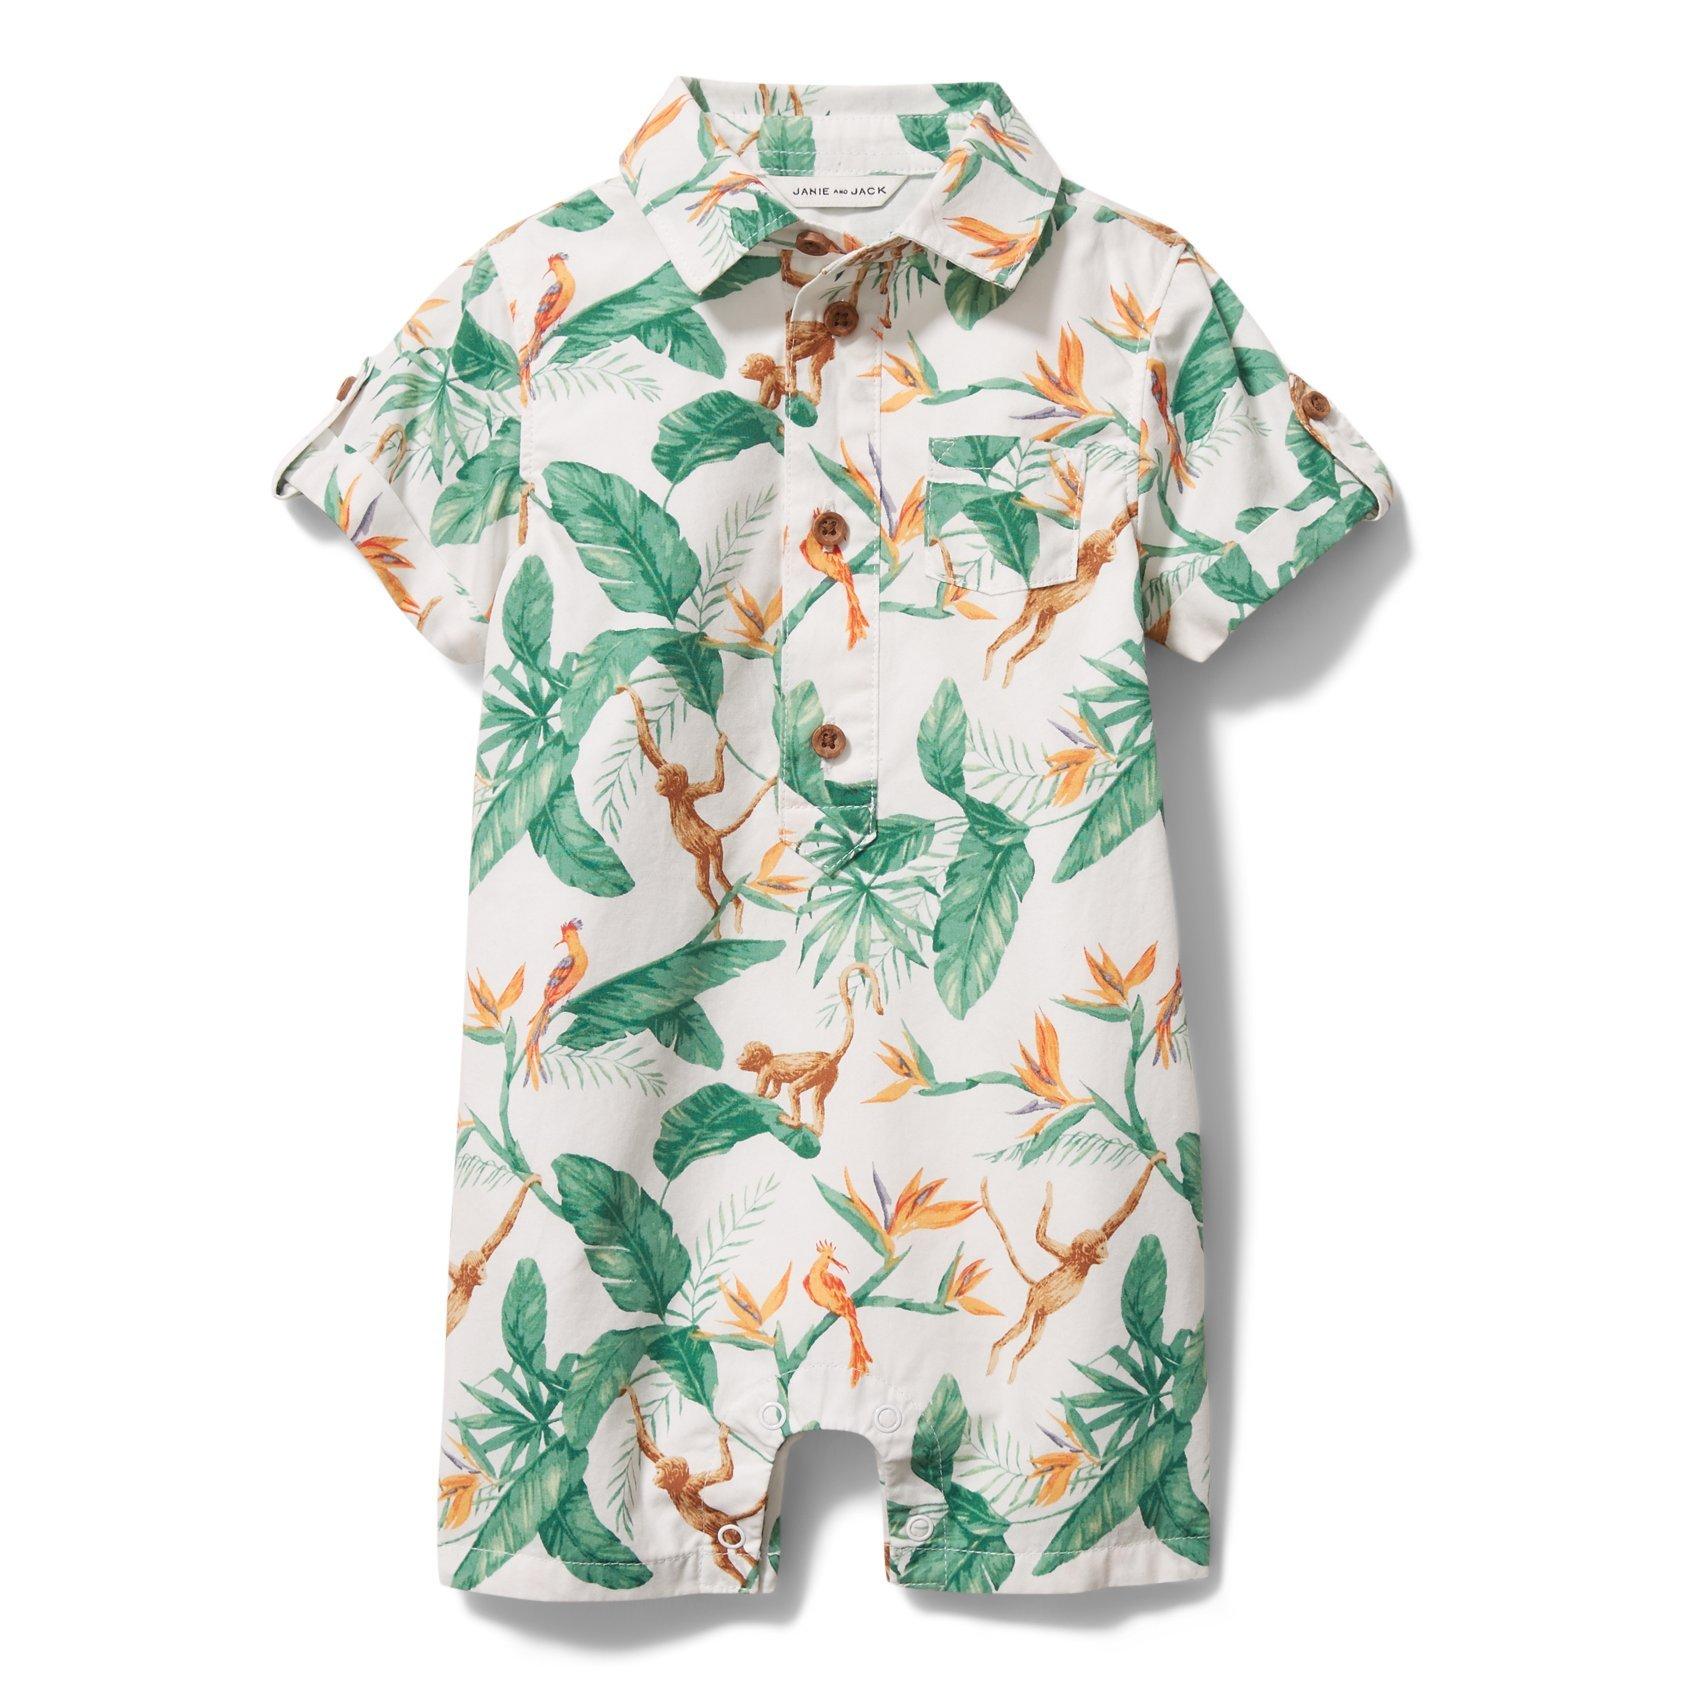 sibling matches for summer, tropical boy romper